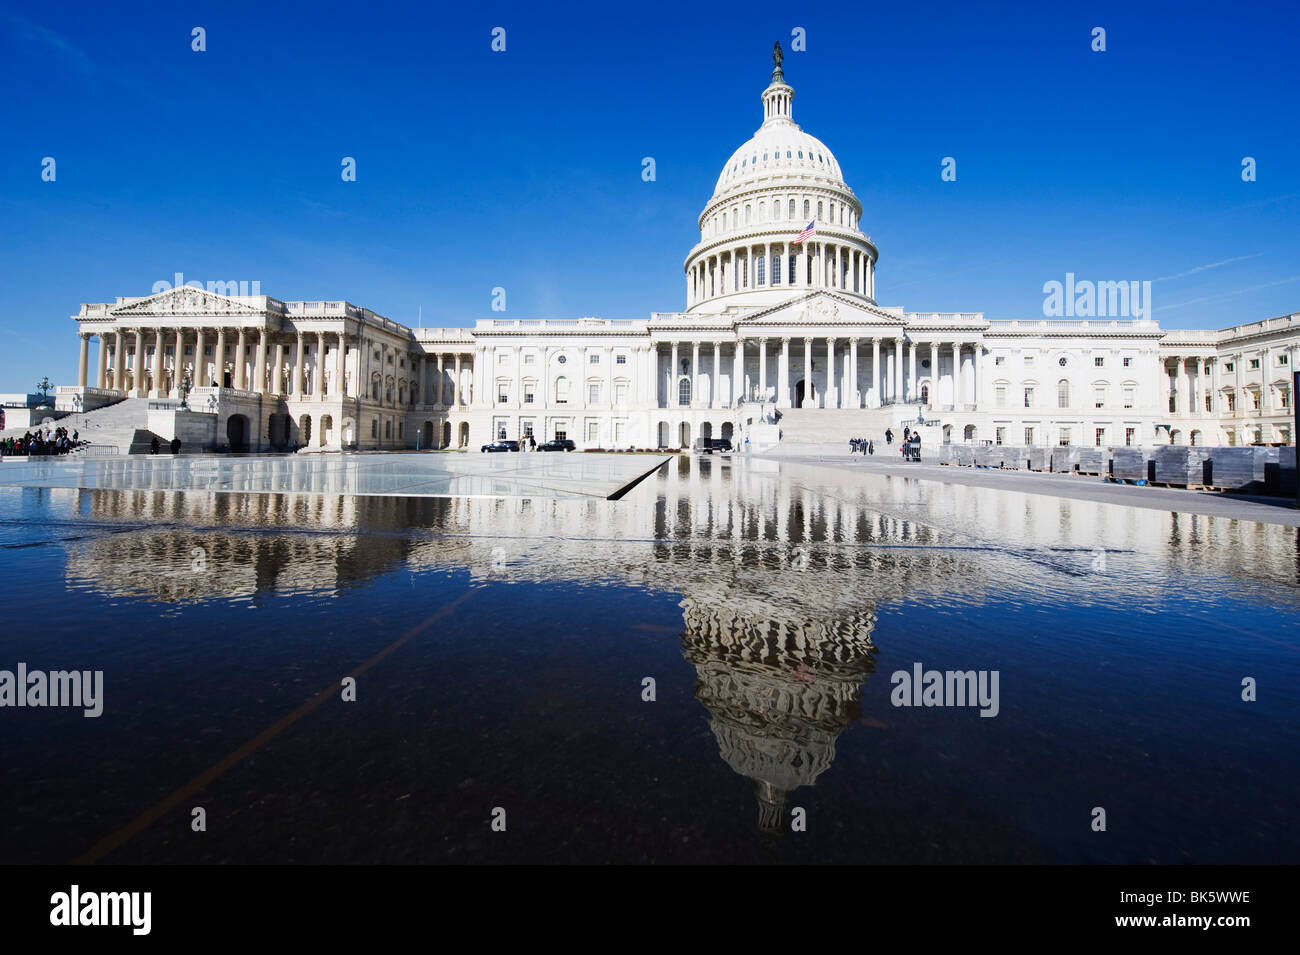 The Capitol Building, Capitol Hill, Washington D.C., United States of America, North America Stock Photo